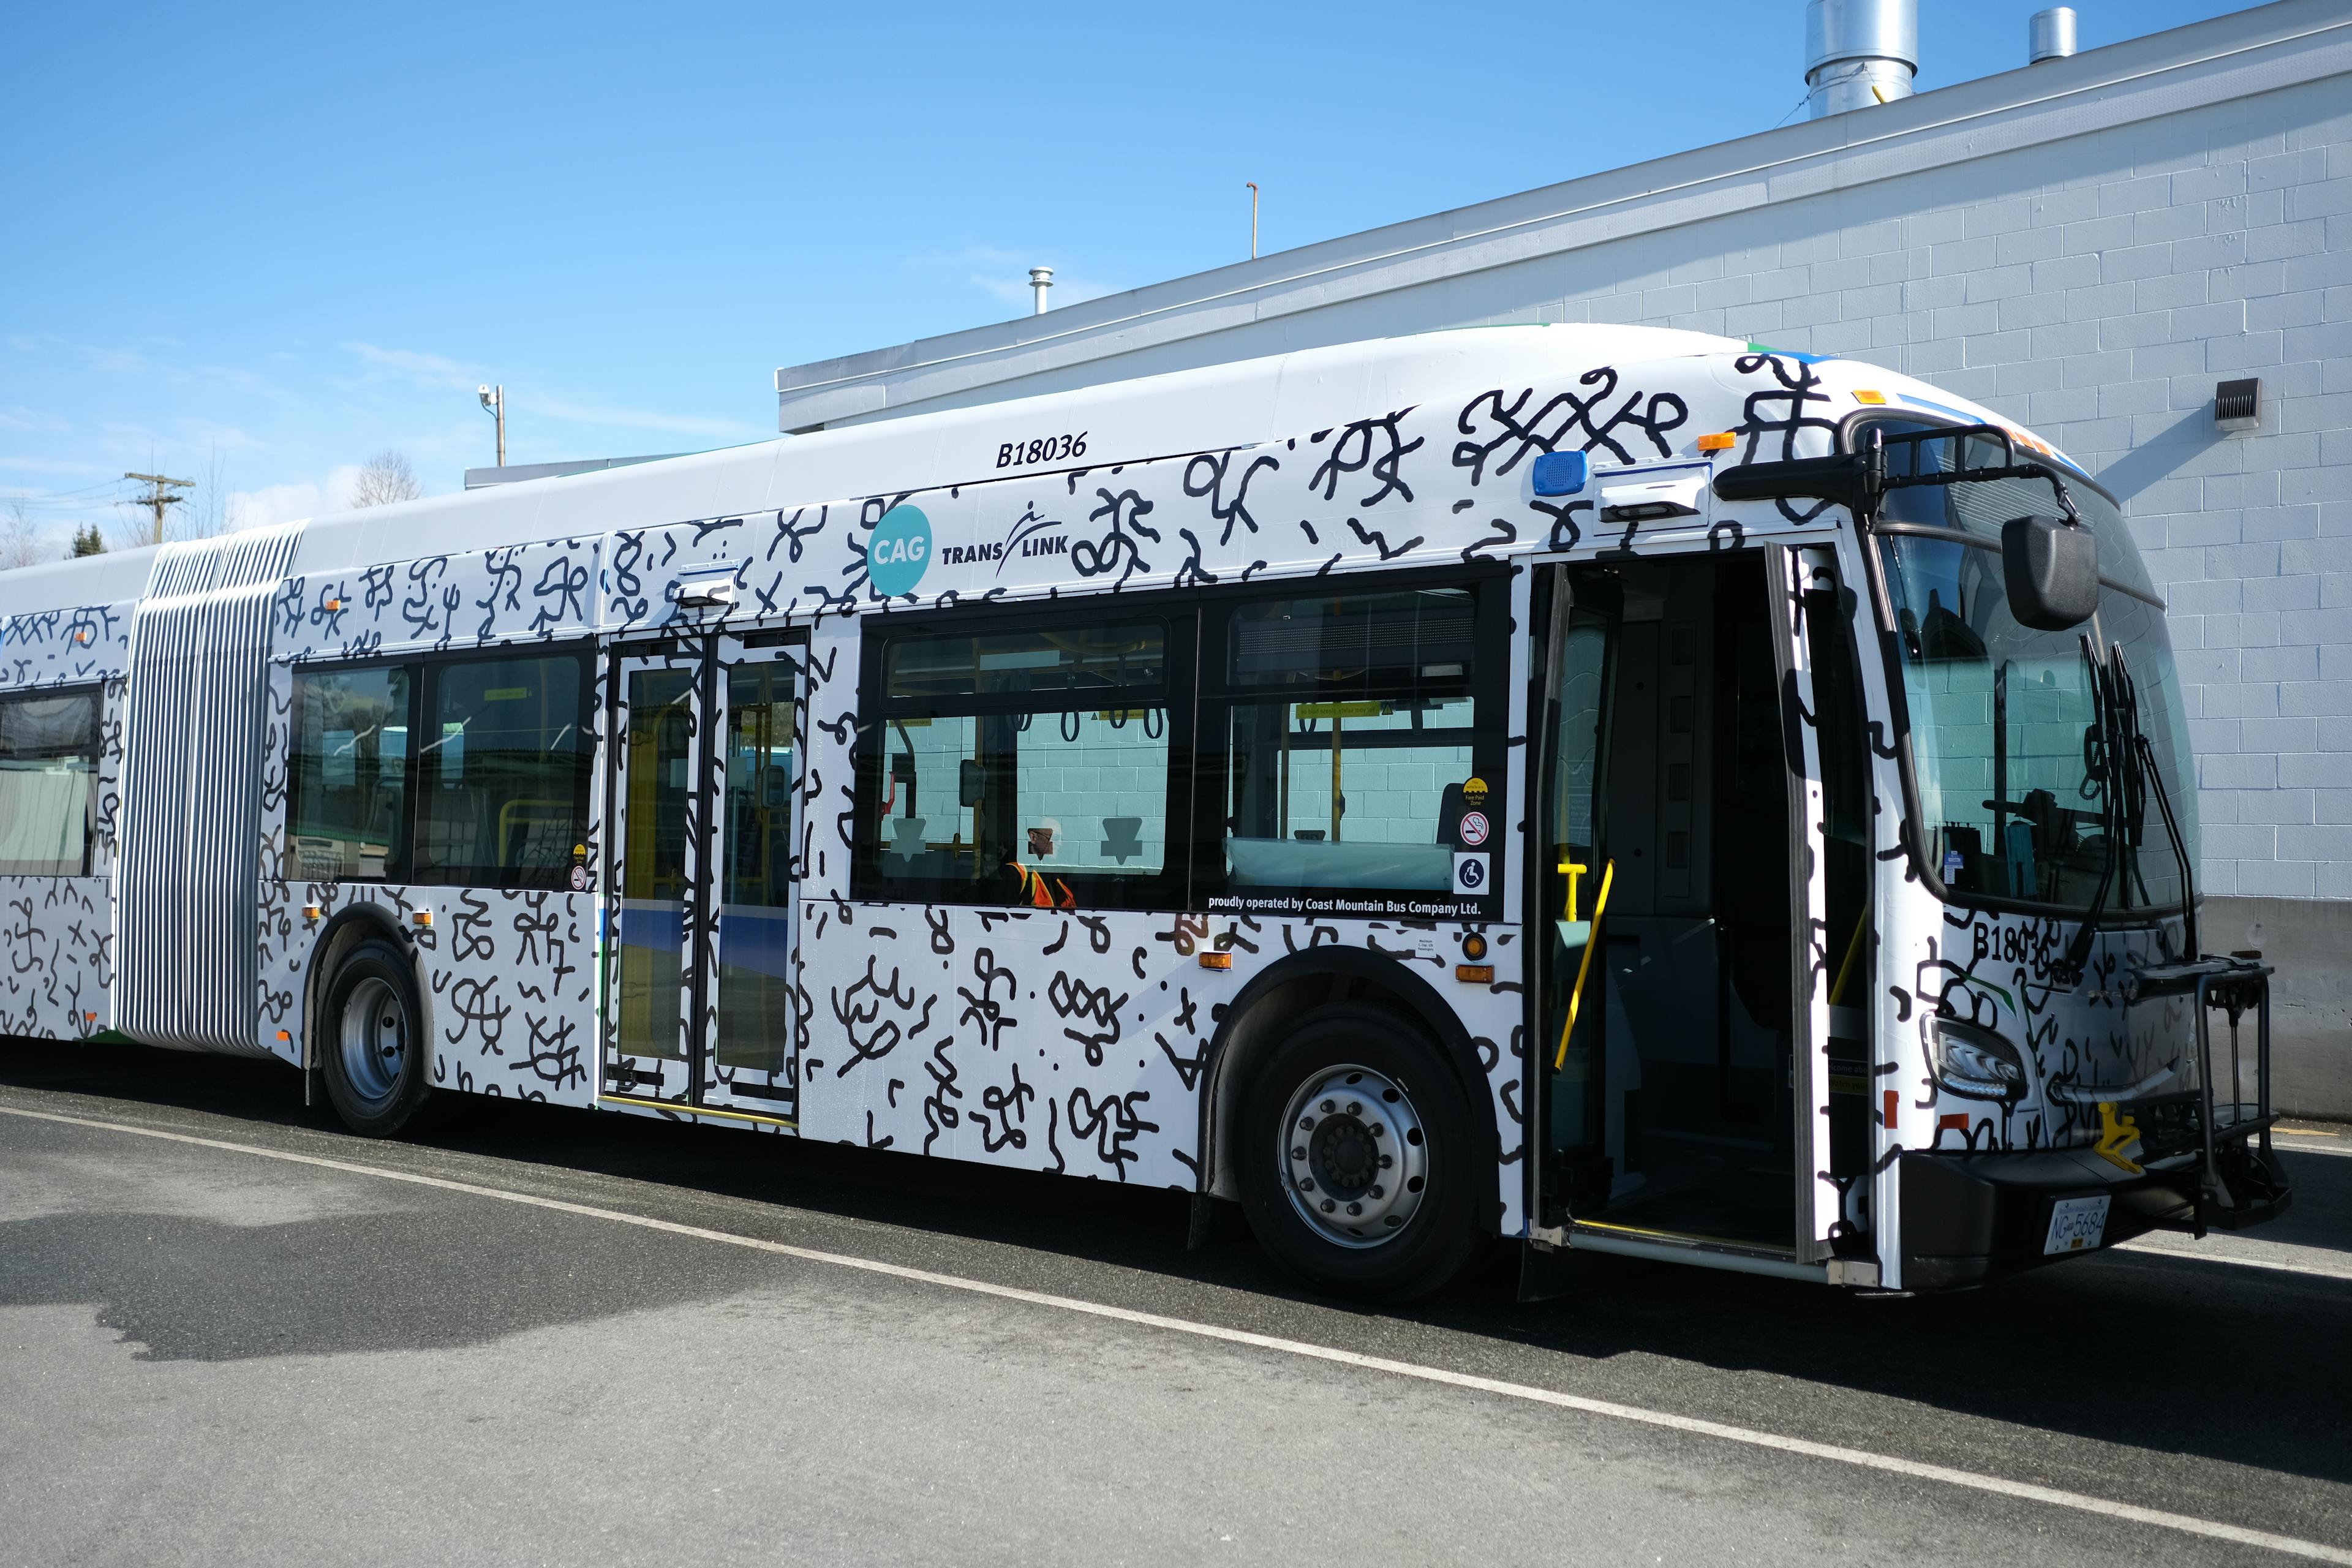 An image of the exterior of a transit bus that is wrapped in a patterned vinyl. The vinyl pattern is made up black pictographic imagery on a white background.   